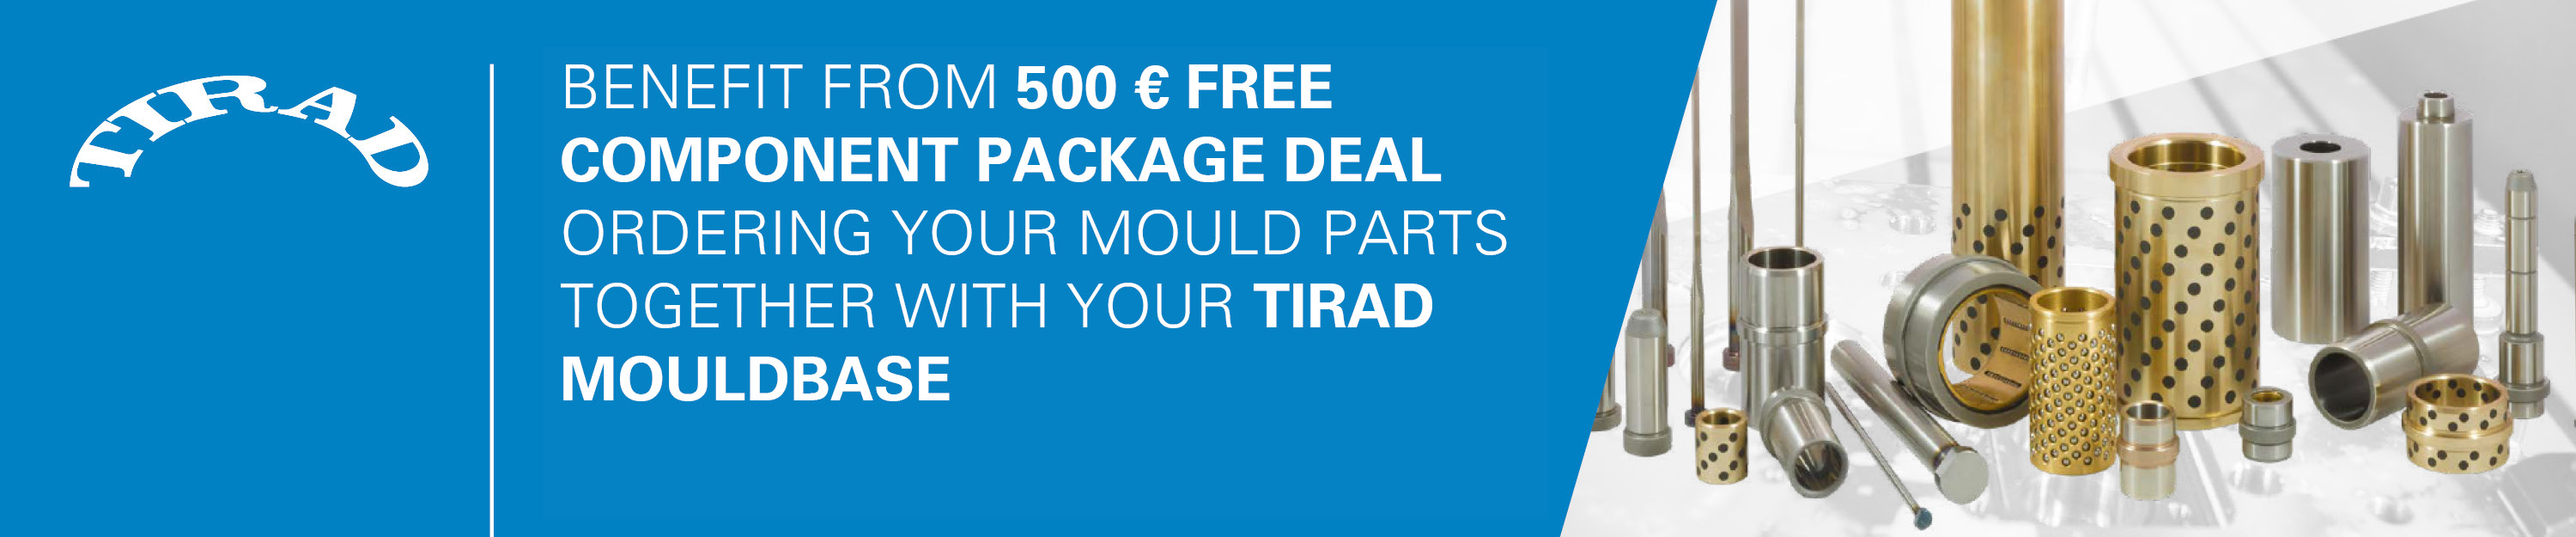 BENEFIT FROM 500 € FREE COMPONENT PACKAGE DEAL